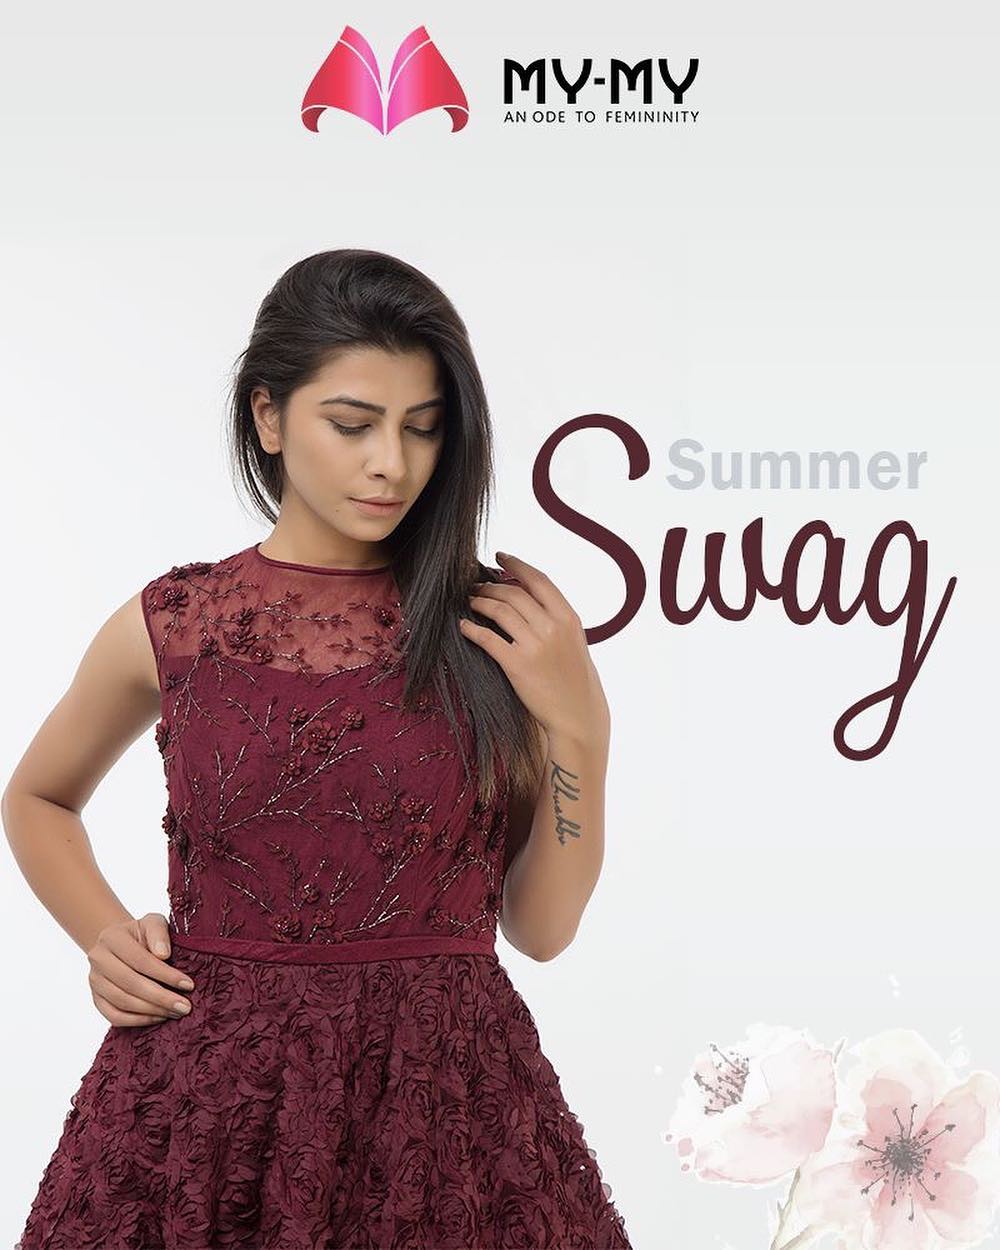 Dresses that add the perfect SWAG to your look! 
#SummerWardrobe #MyMy #MyMyAhmedabad #Fashion #Ahmedabad